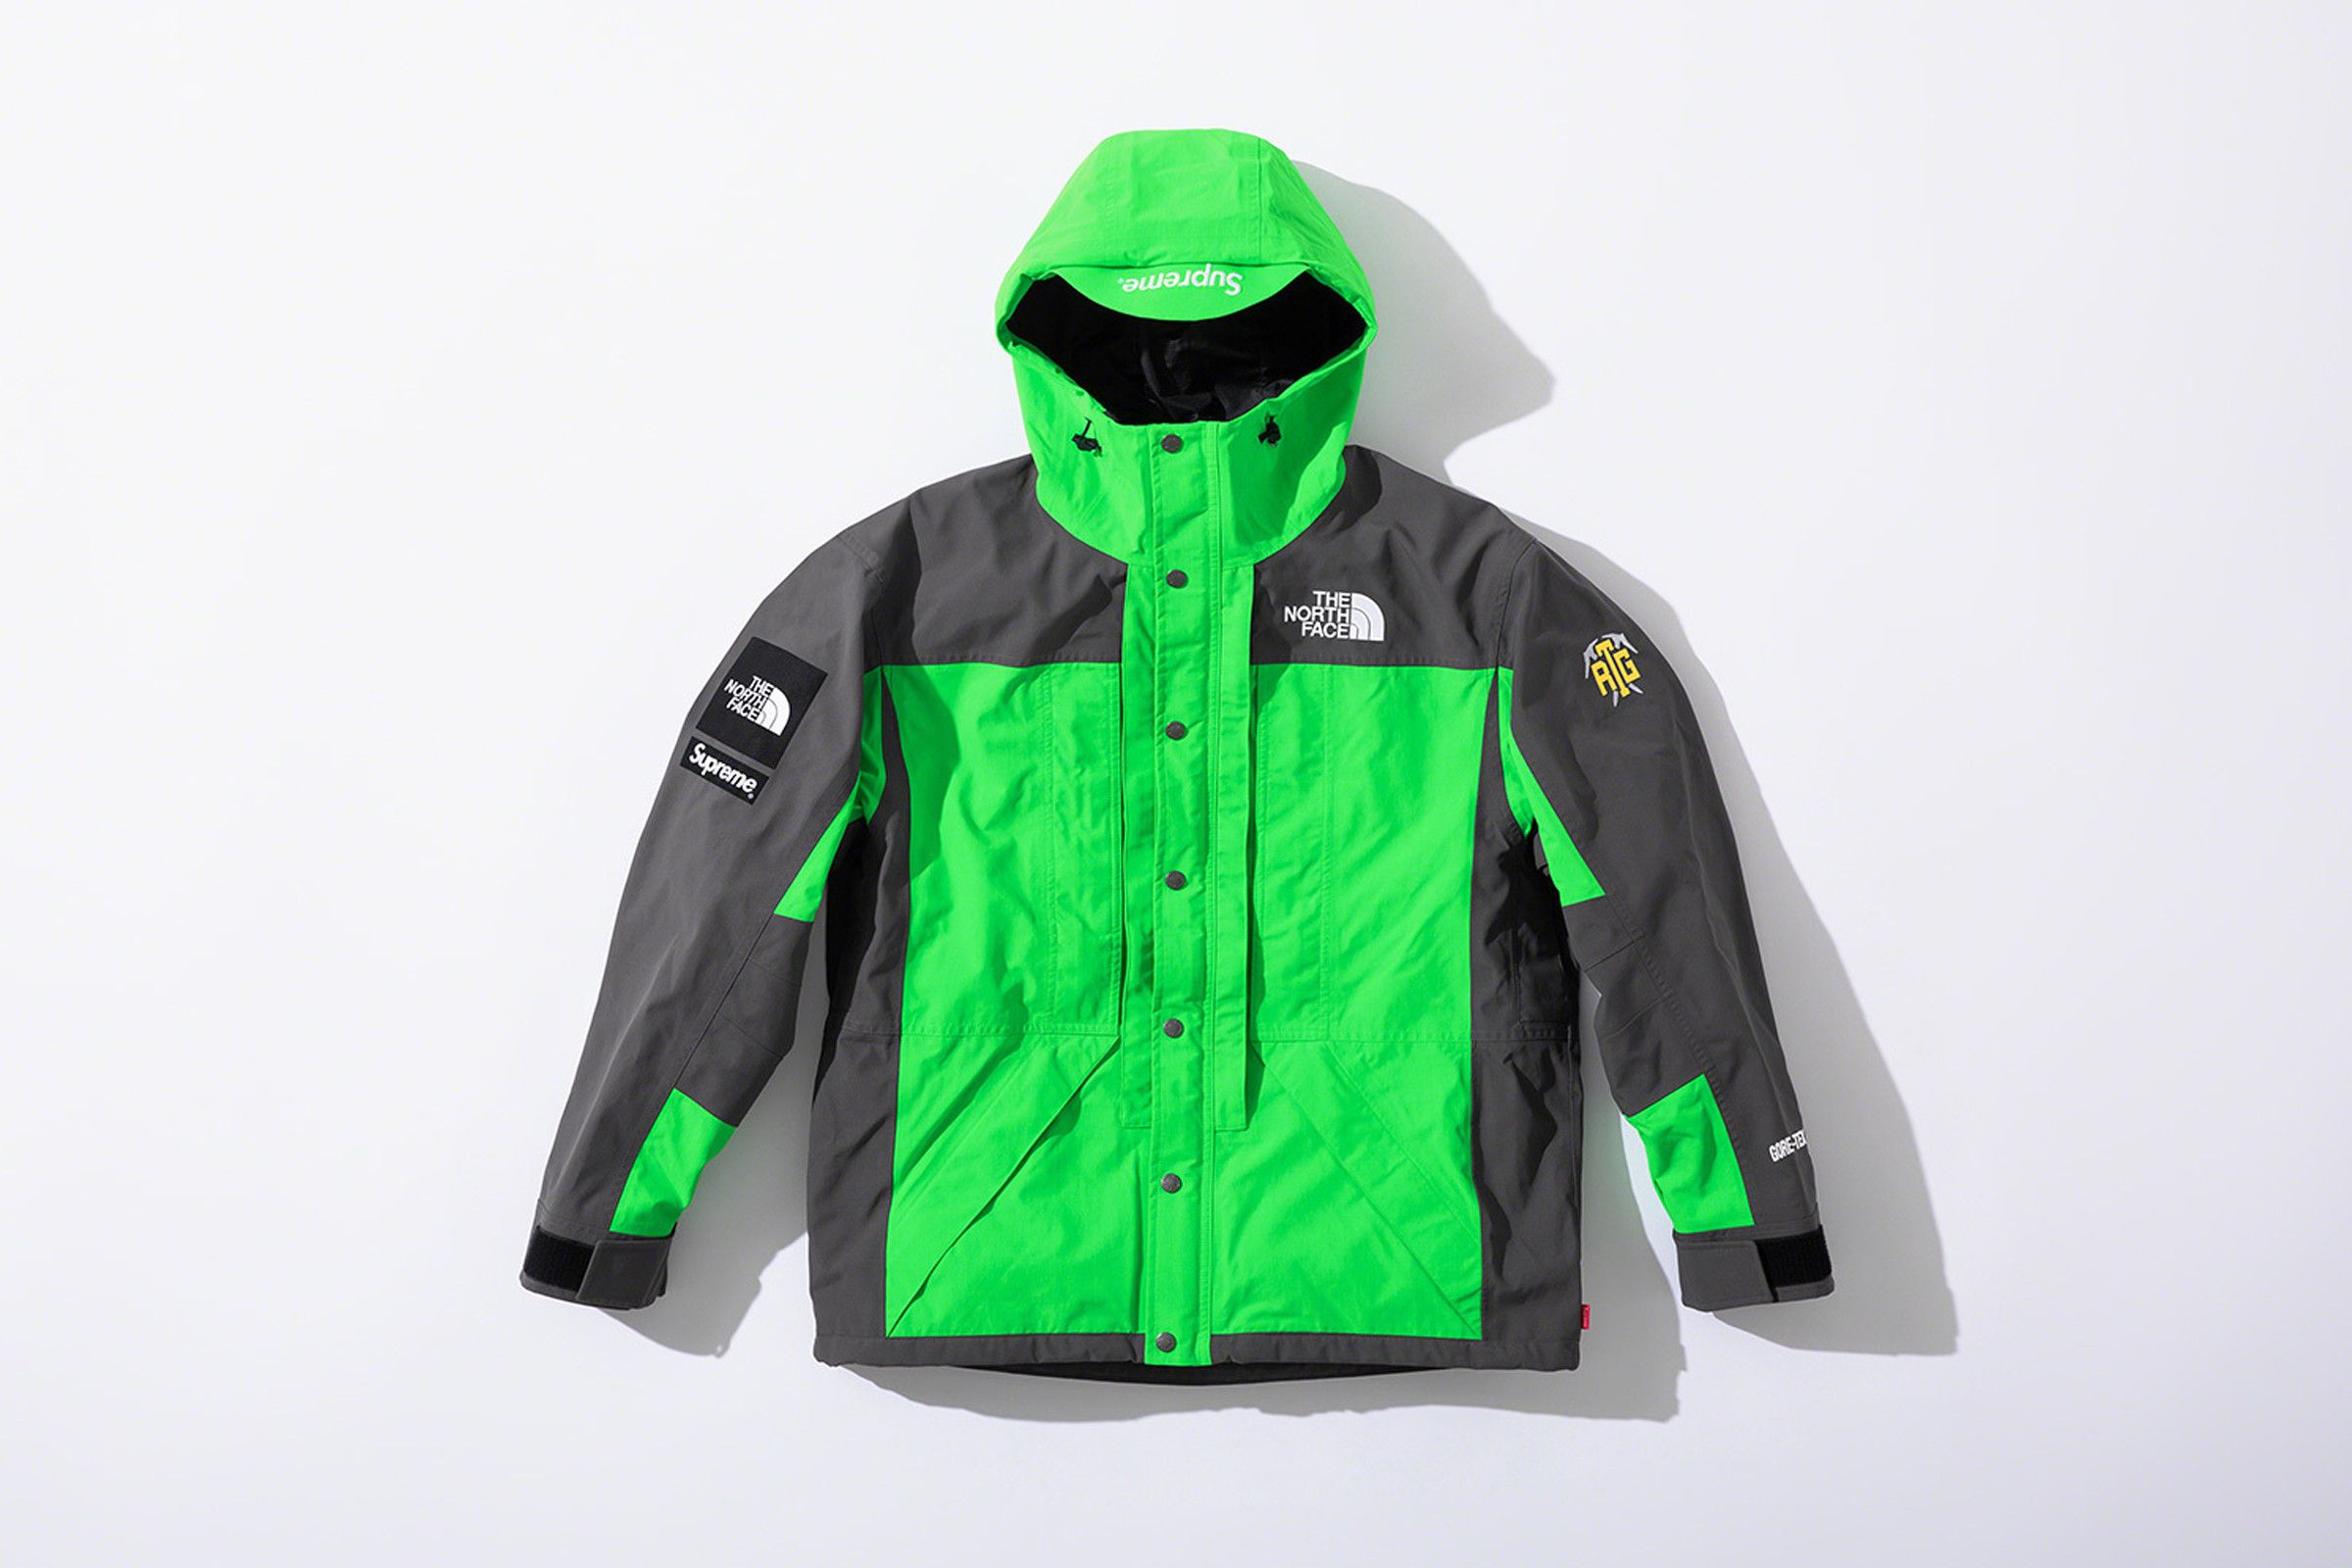 Supreme x The North Face return with Fall 2020 collection